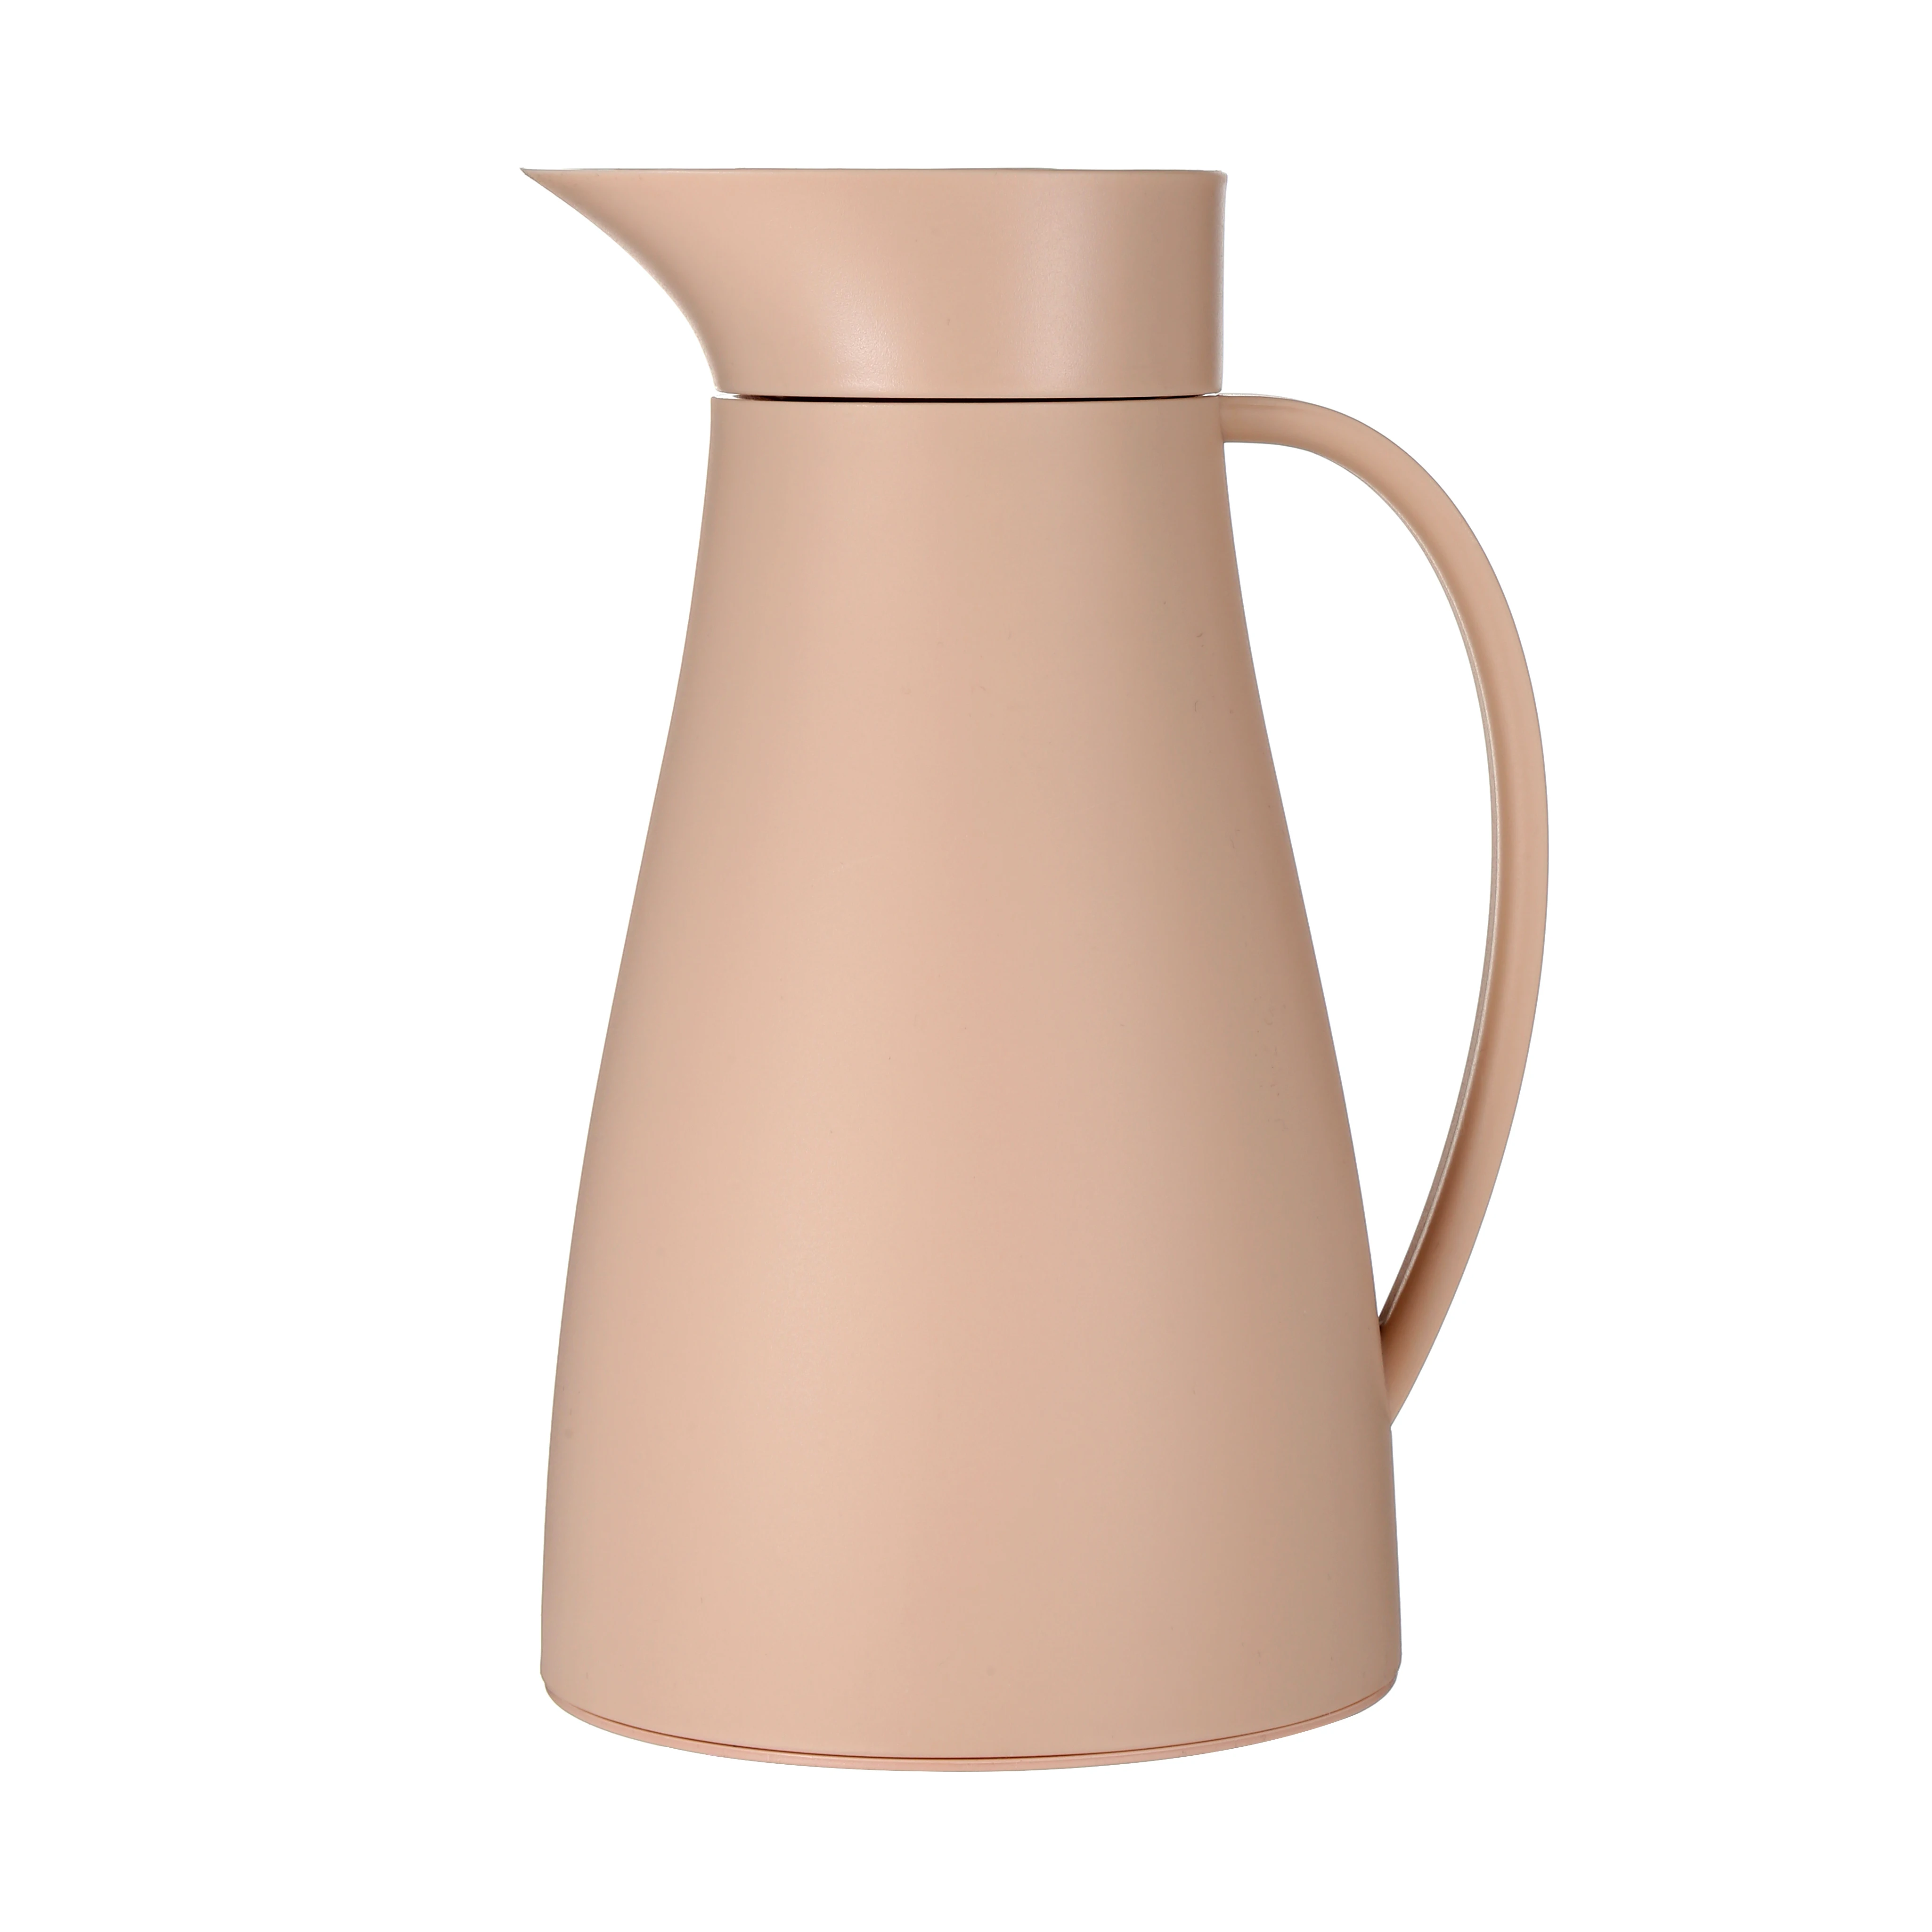 

Thermal Coffee Carafe / Double Walled Vacuum Flask / 12 Hour Heat Retention / 2 Liter Tea, Water, and Coffee